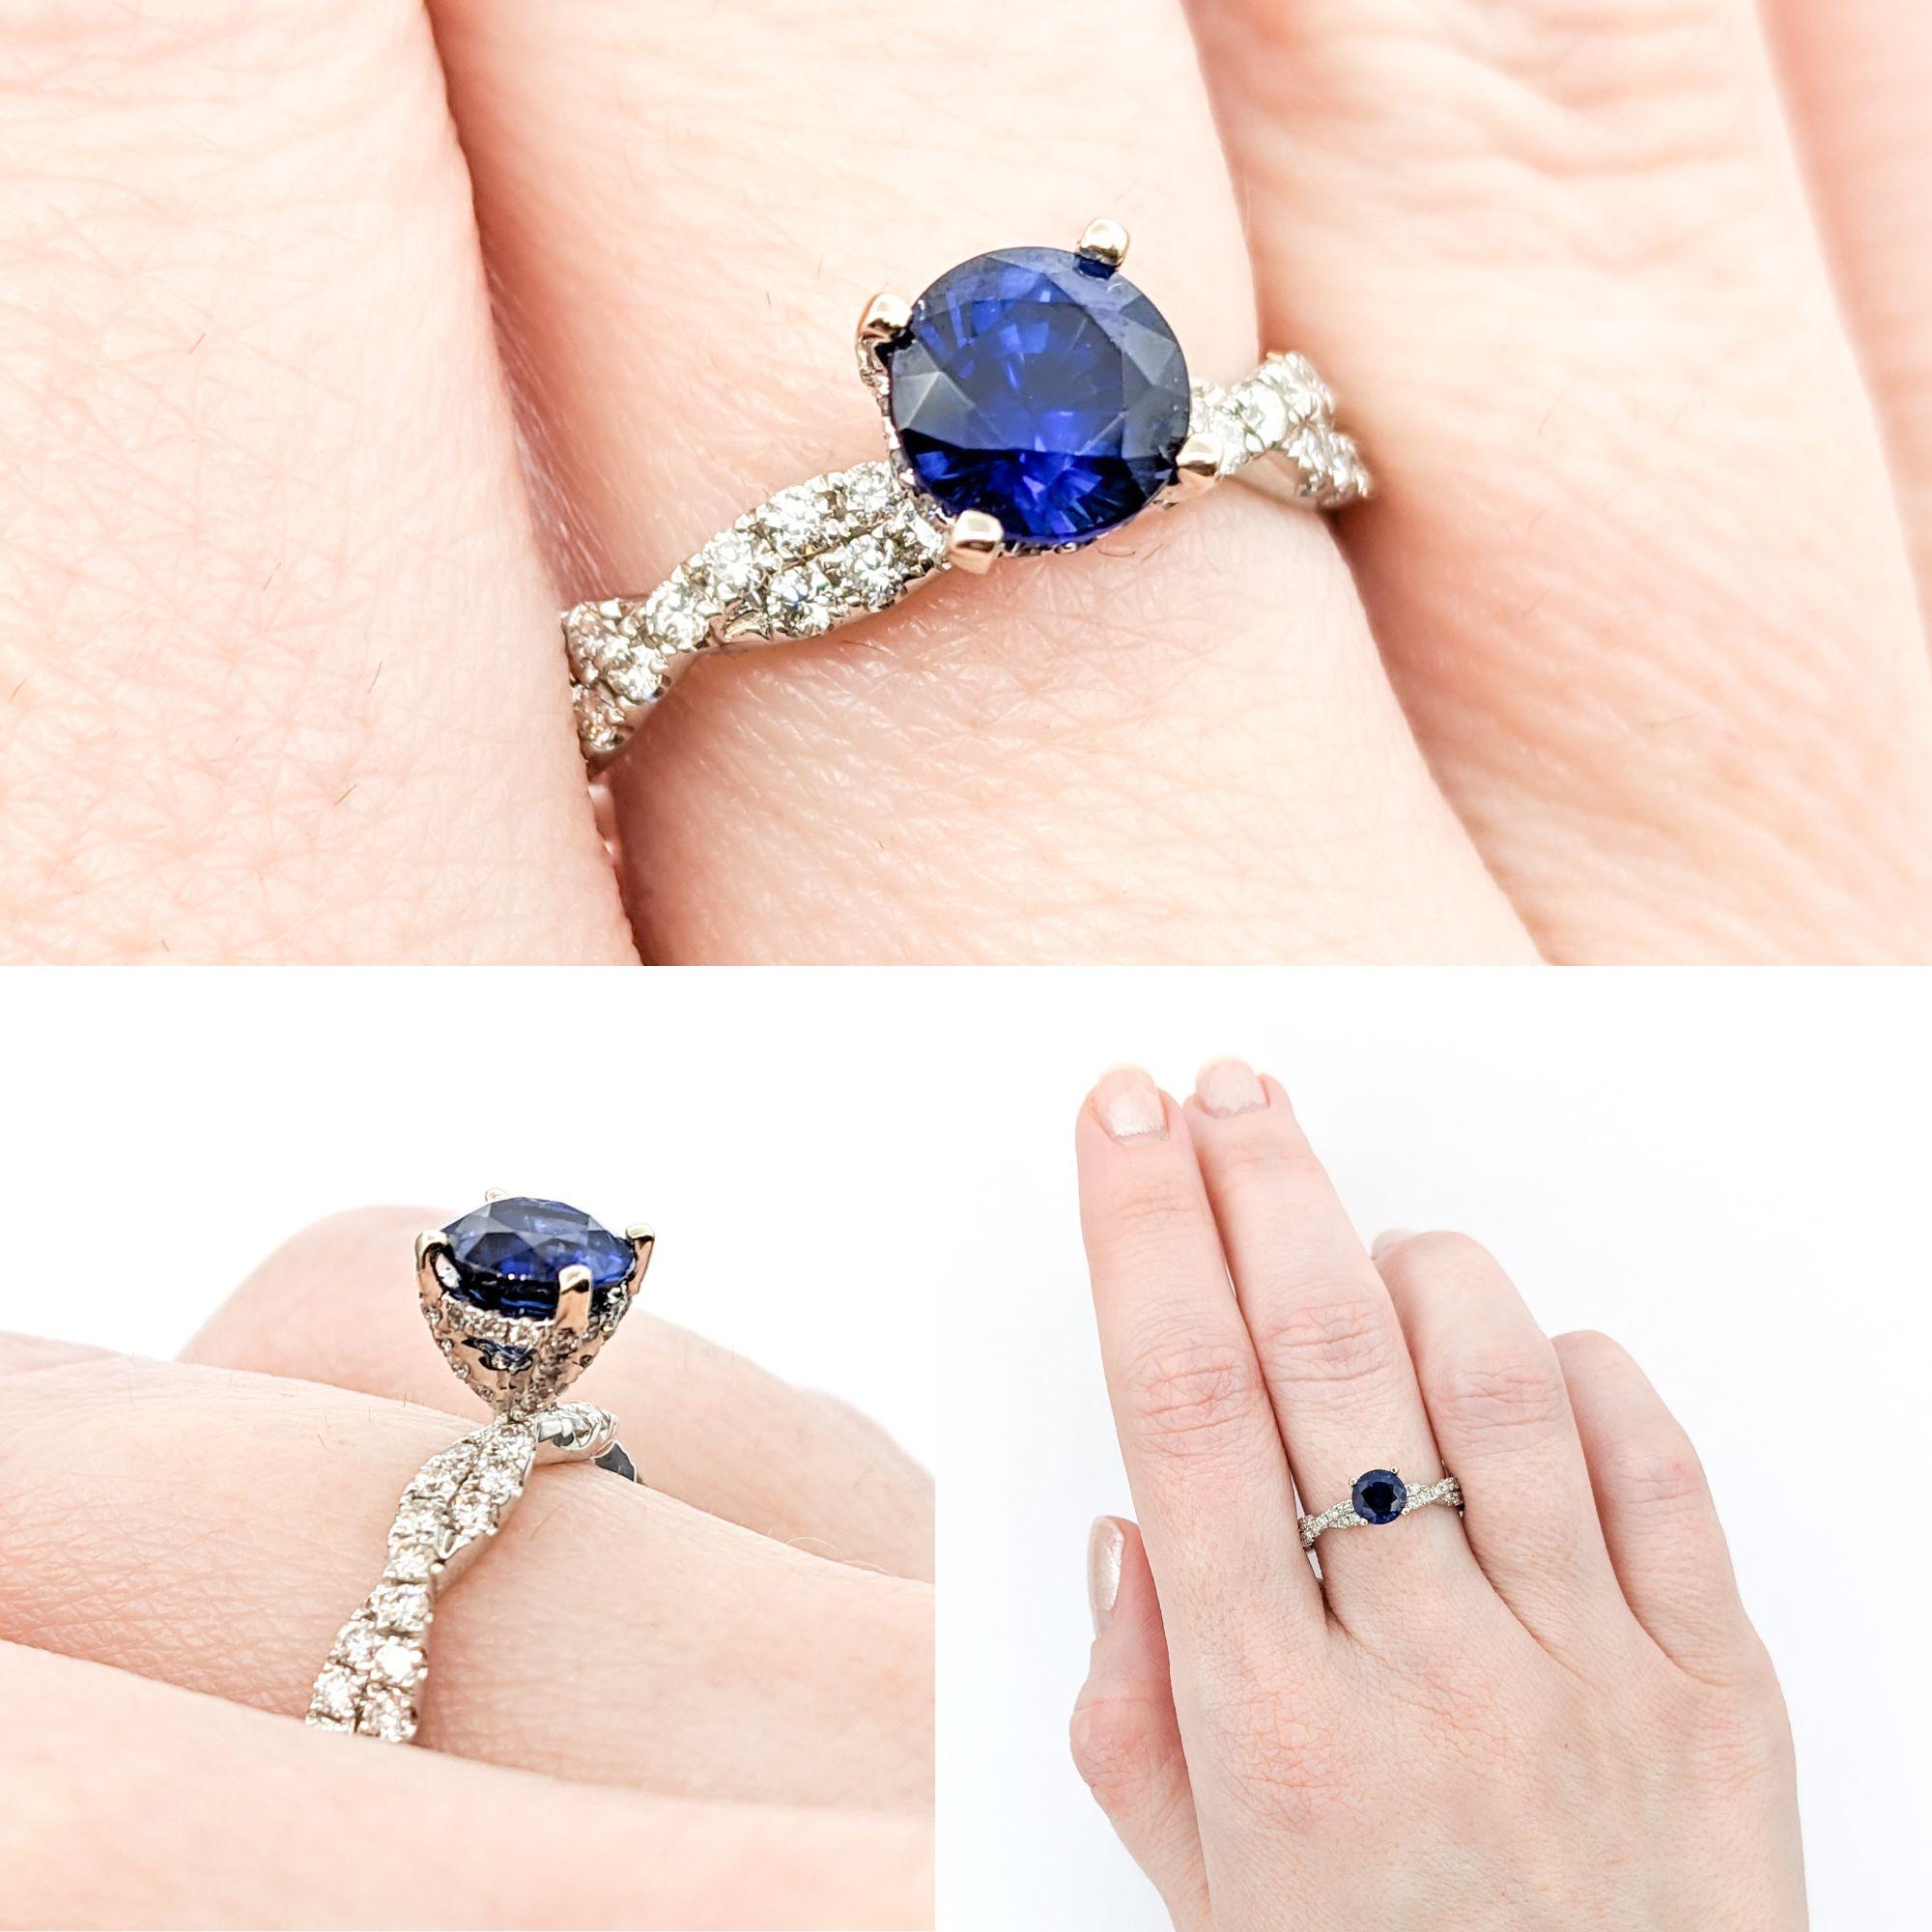 1.10ct Blue Sapphire & Diamond Ring In White Gold

Introducing a stunning Gemstone Fashion Ring for women, exquisitely crafted in 14kt White Gold. This elegant piece features a beautiful 1.10ct Sapphire, which serves as the centerpiece, adding a